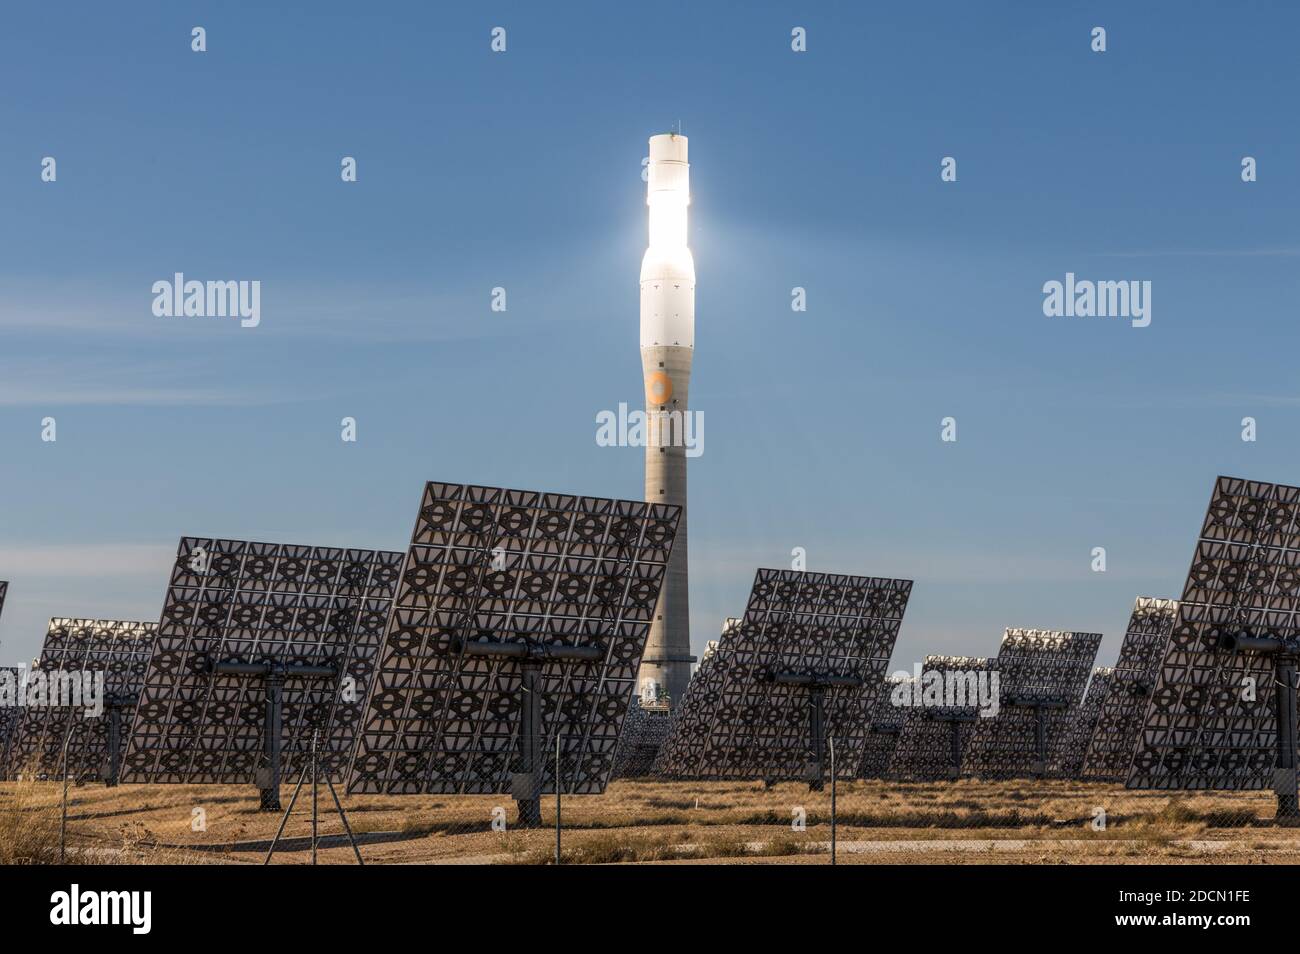 Gemasolar power station is the first commercial solar plant with central tower receiver and molten salt heat storage technology.Its storage system all Stock Photo